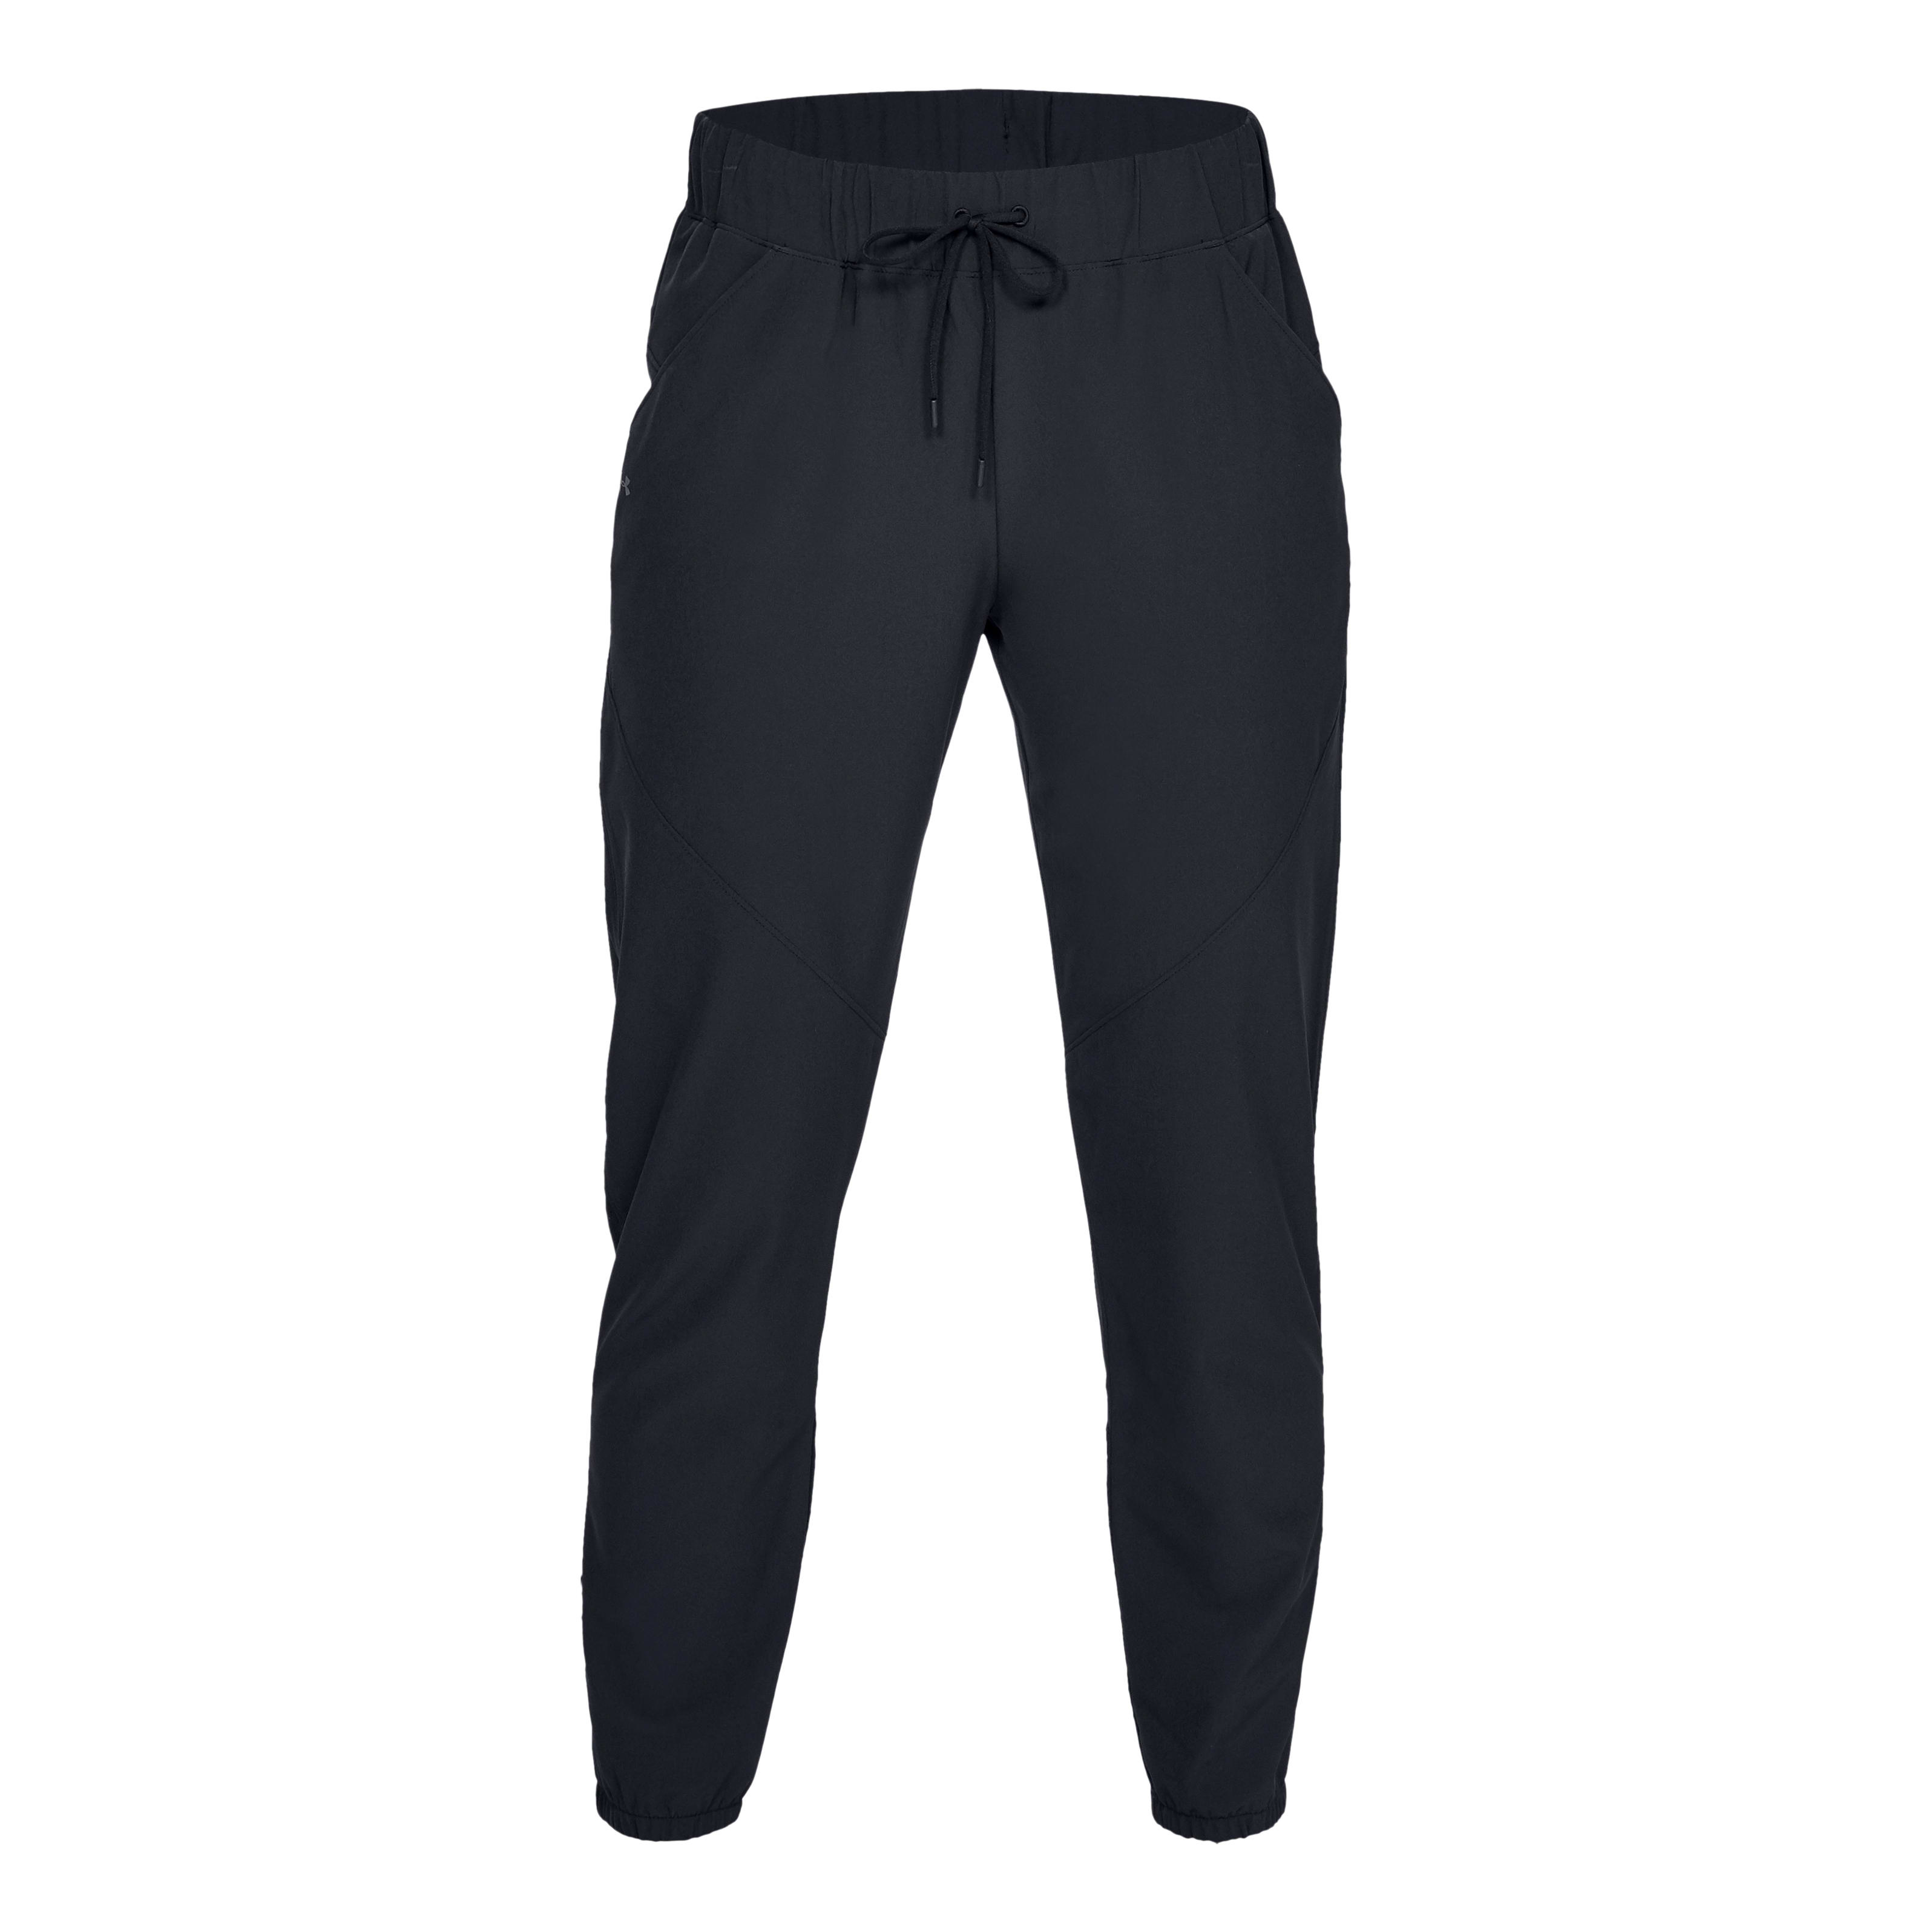 New Womens The North Face Aphrodite 2.0 HD Athletic Pants Black